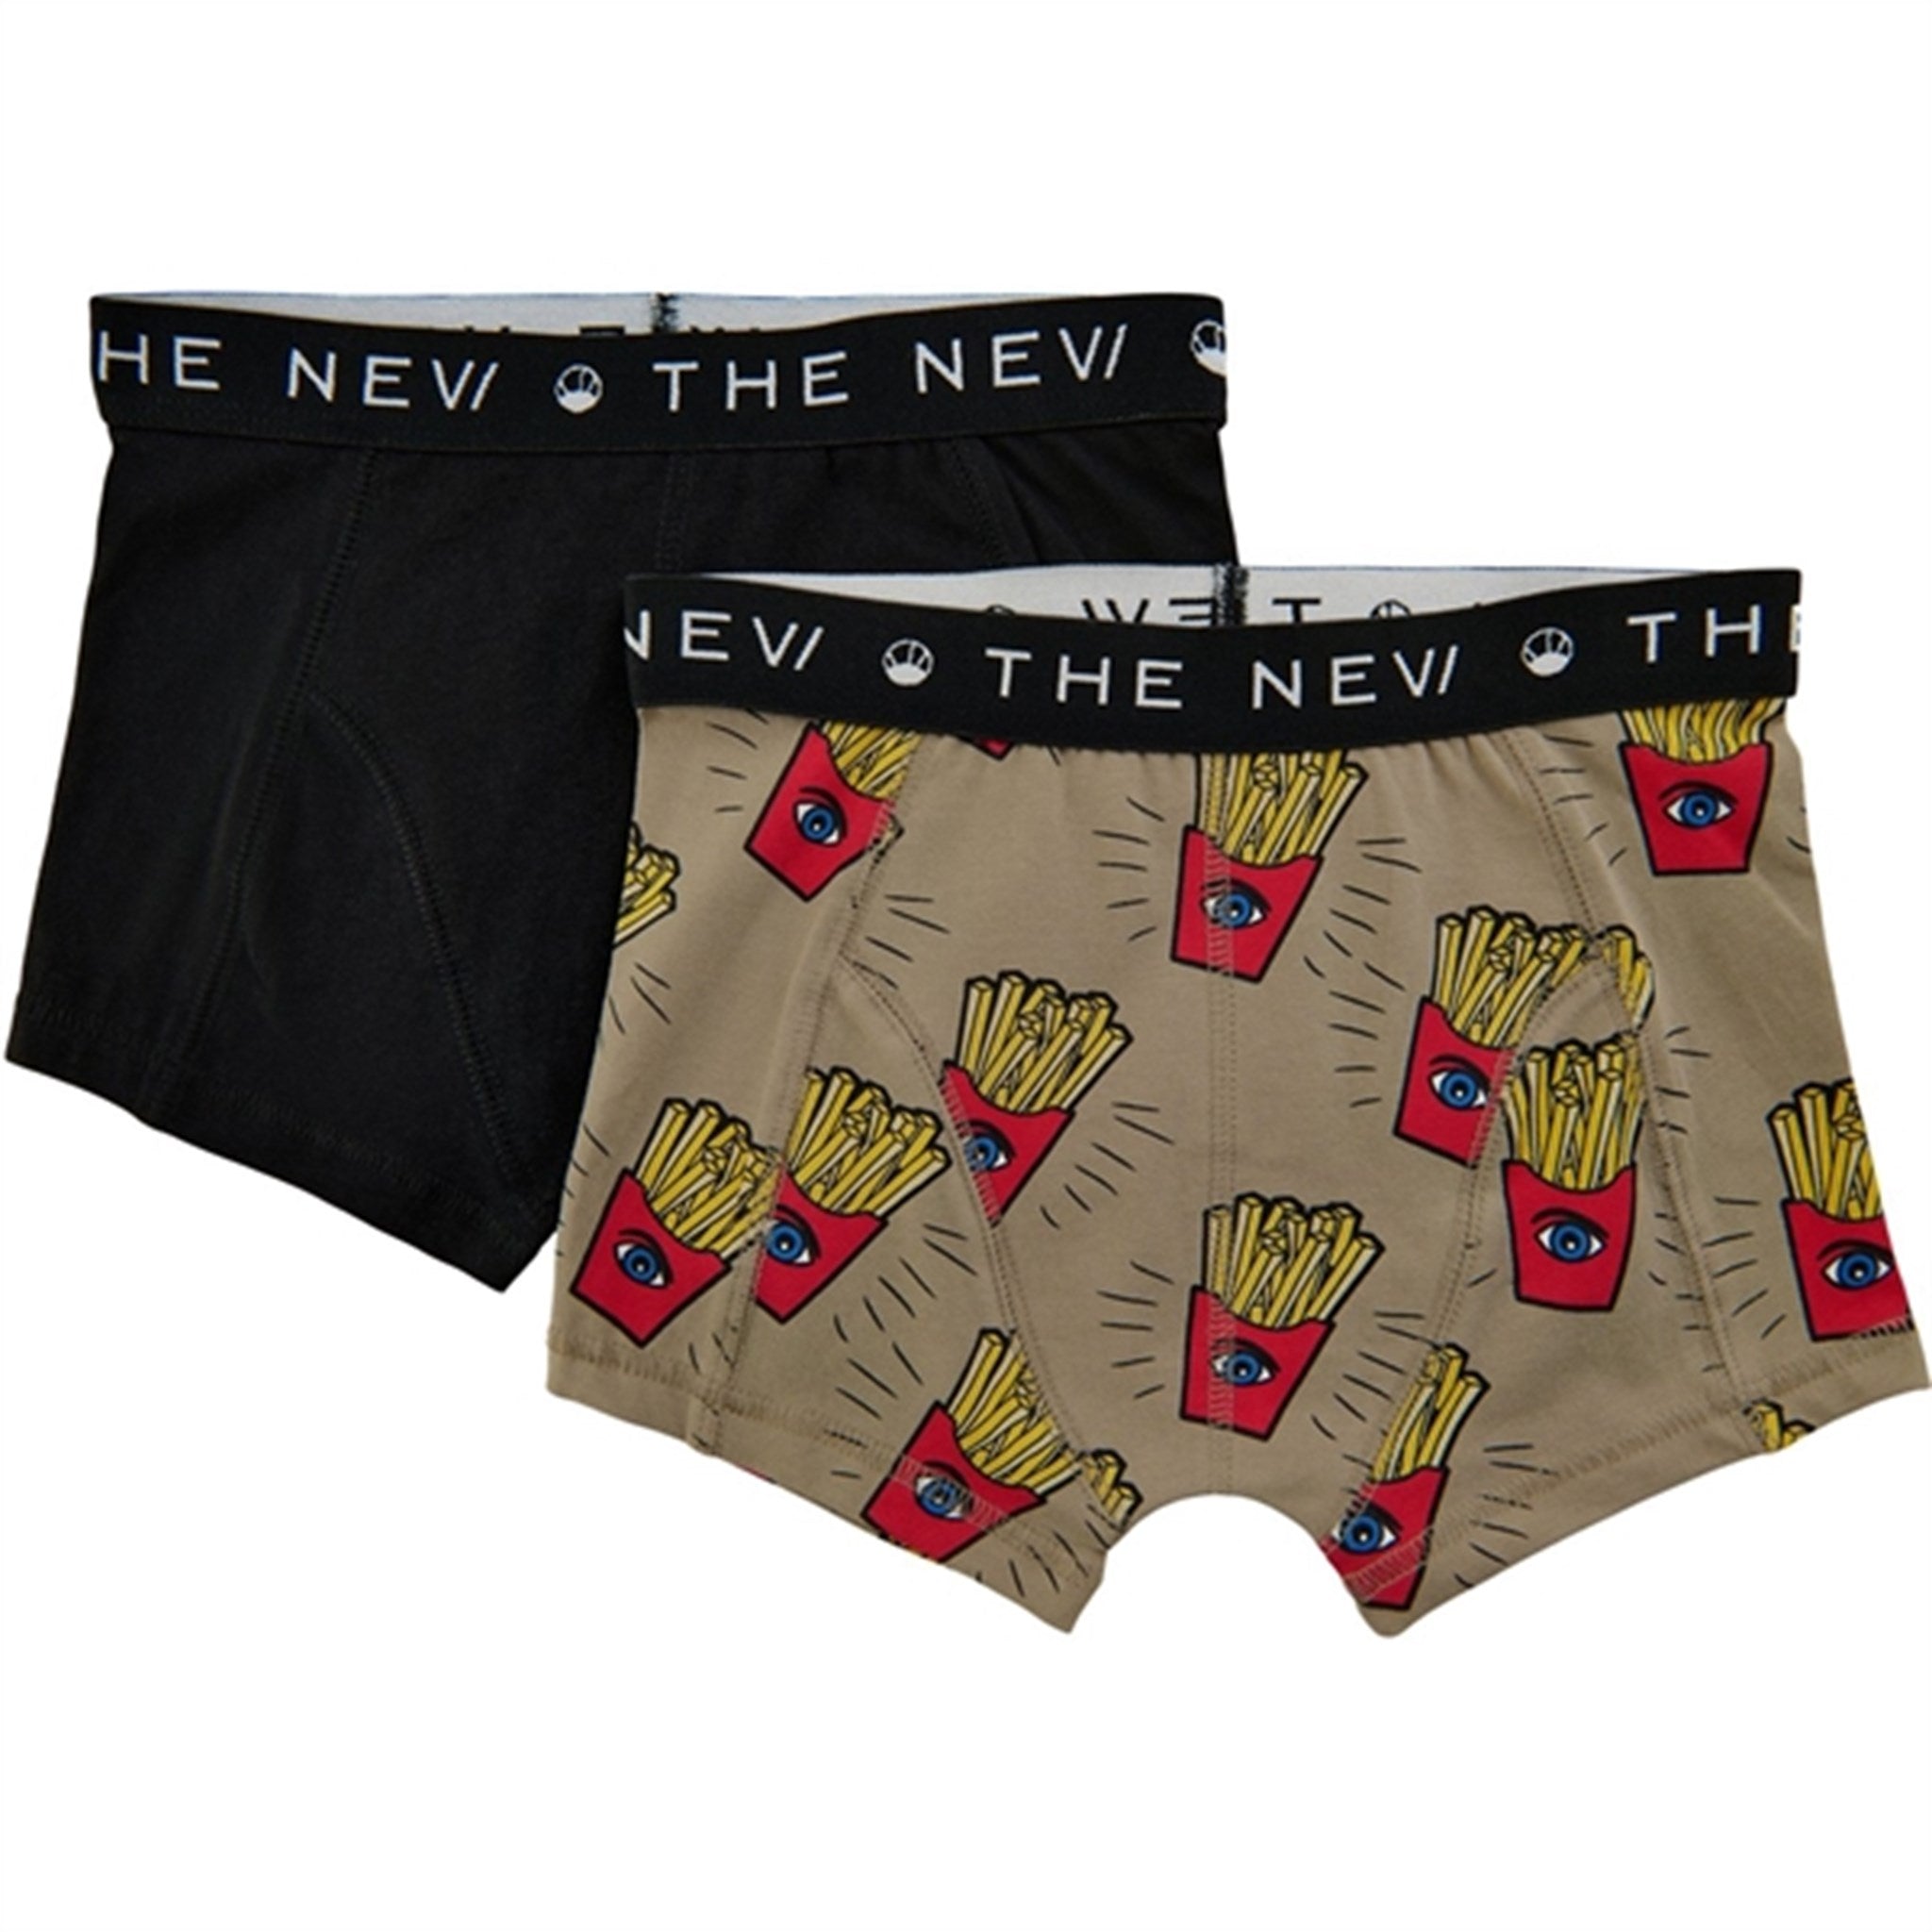 THE NEW Greige Boxers 2-pack